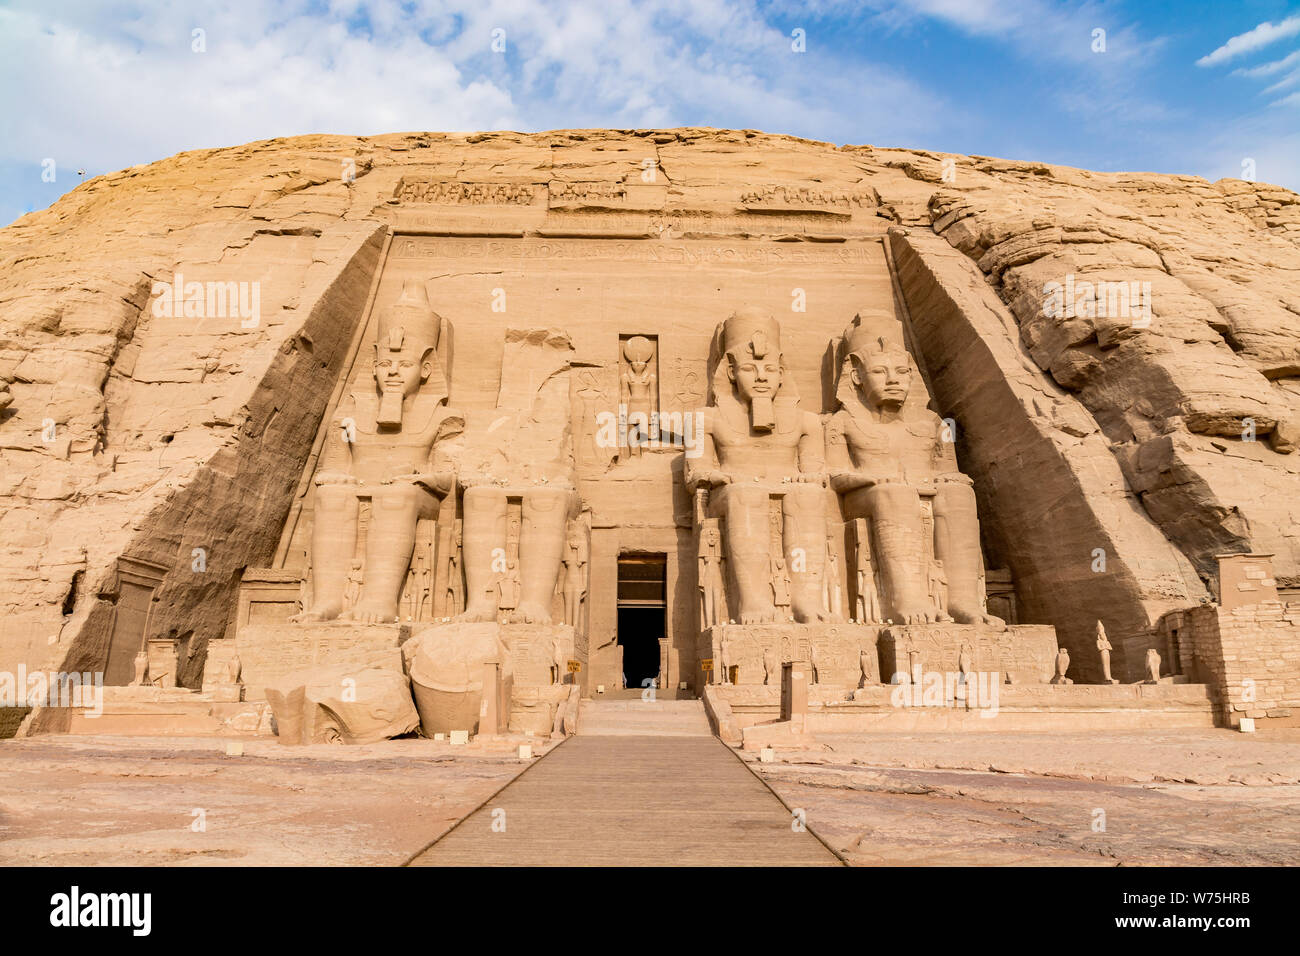 Abu Simbel temple, a magnificent landmark built by pharaoh Ramesses the Great, Egypt Stock Photo